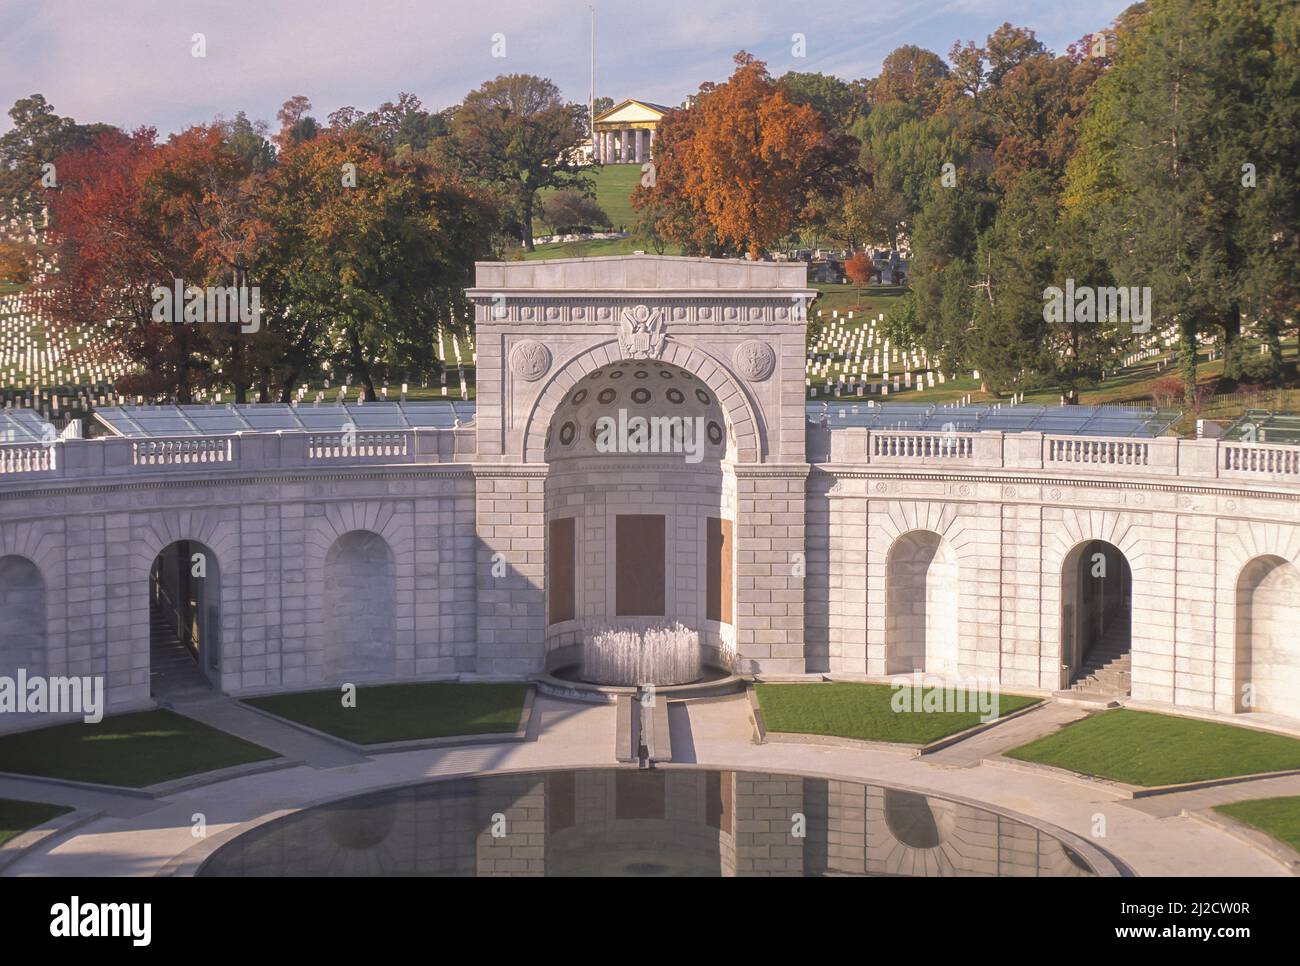 ARLINGTON, VIRGINIA, USA - The Women in Military Service for America Memorial, also known as The Military Women's Memorial, in Arlington National Cemetery. Stock Photo